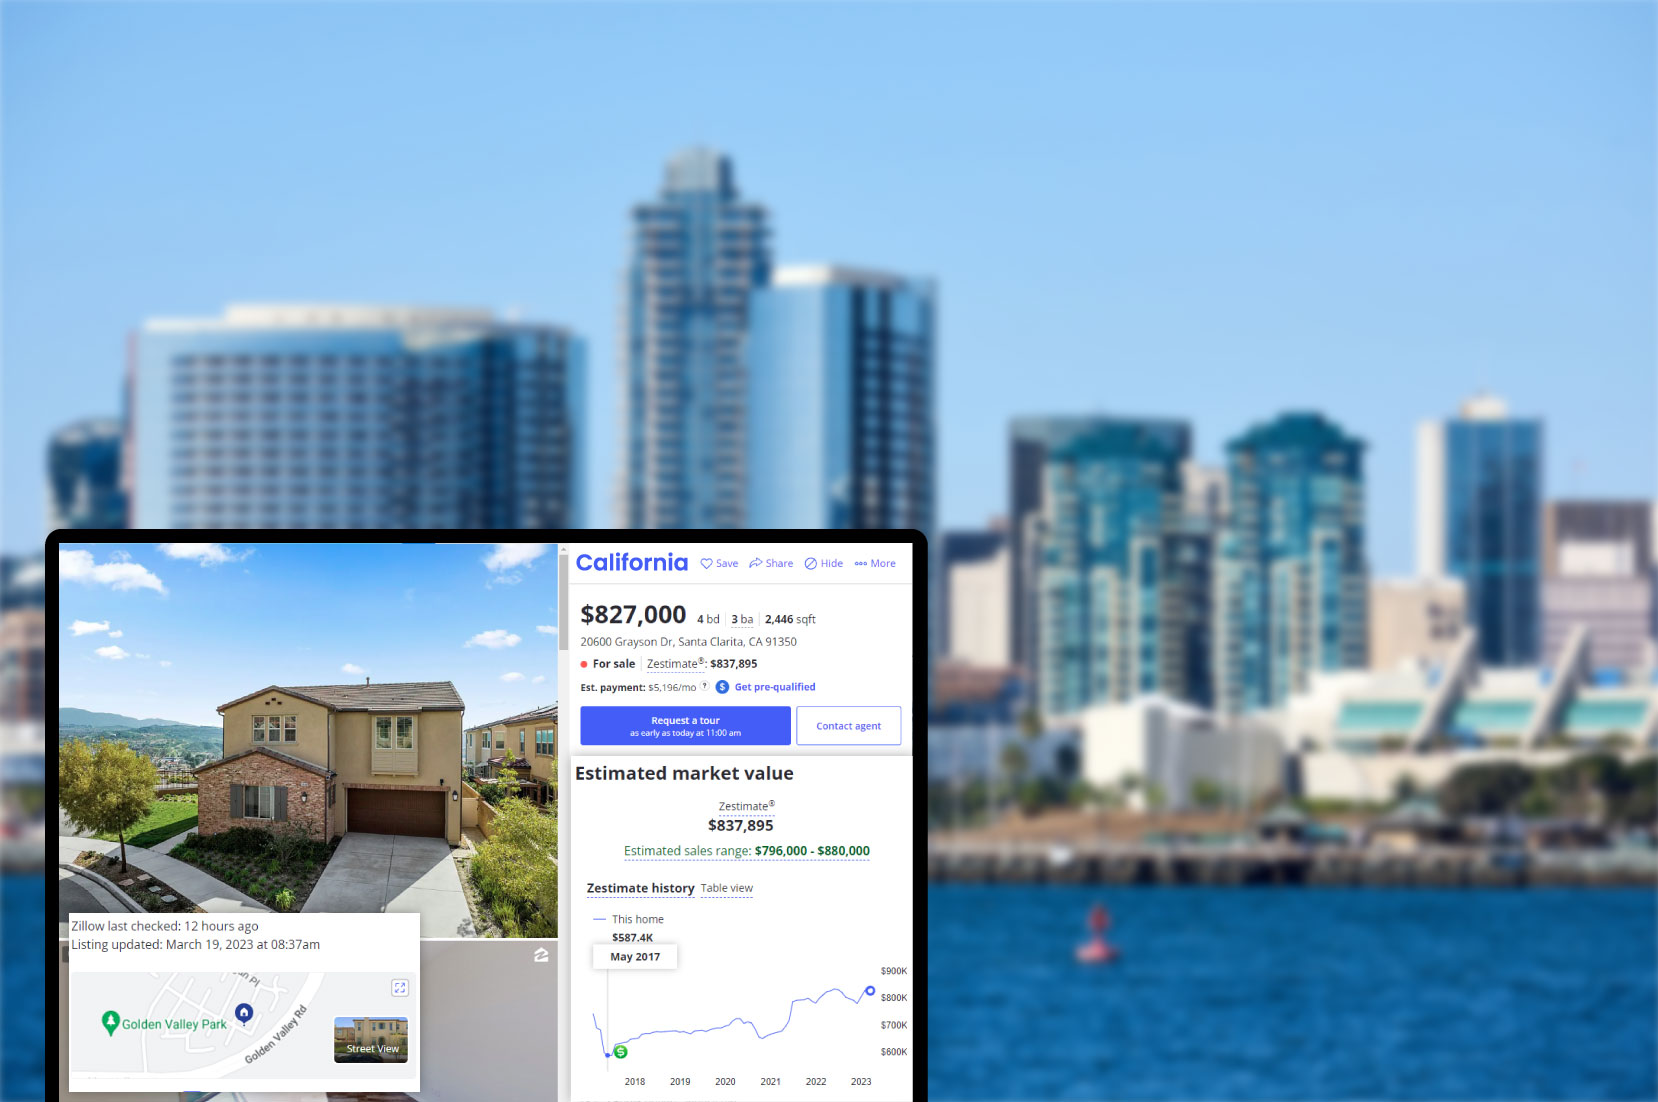 Study-market-trends-and-real-estate-demand-in-California.jpg